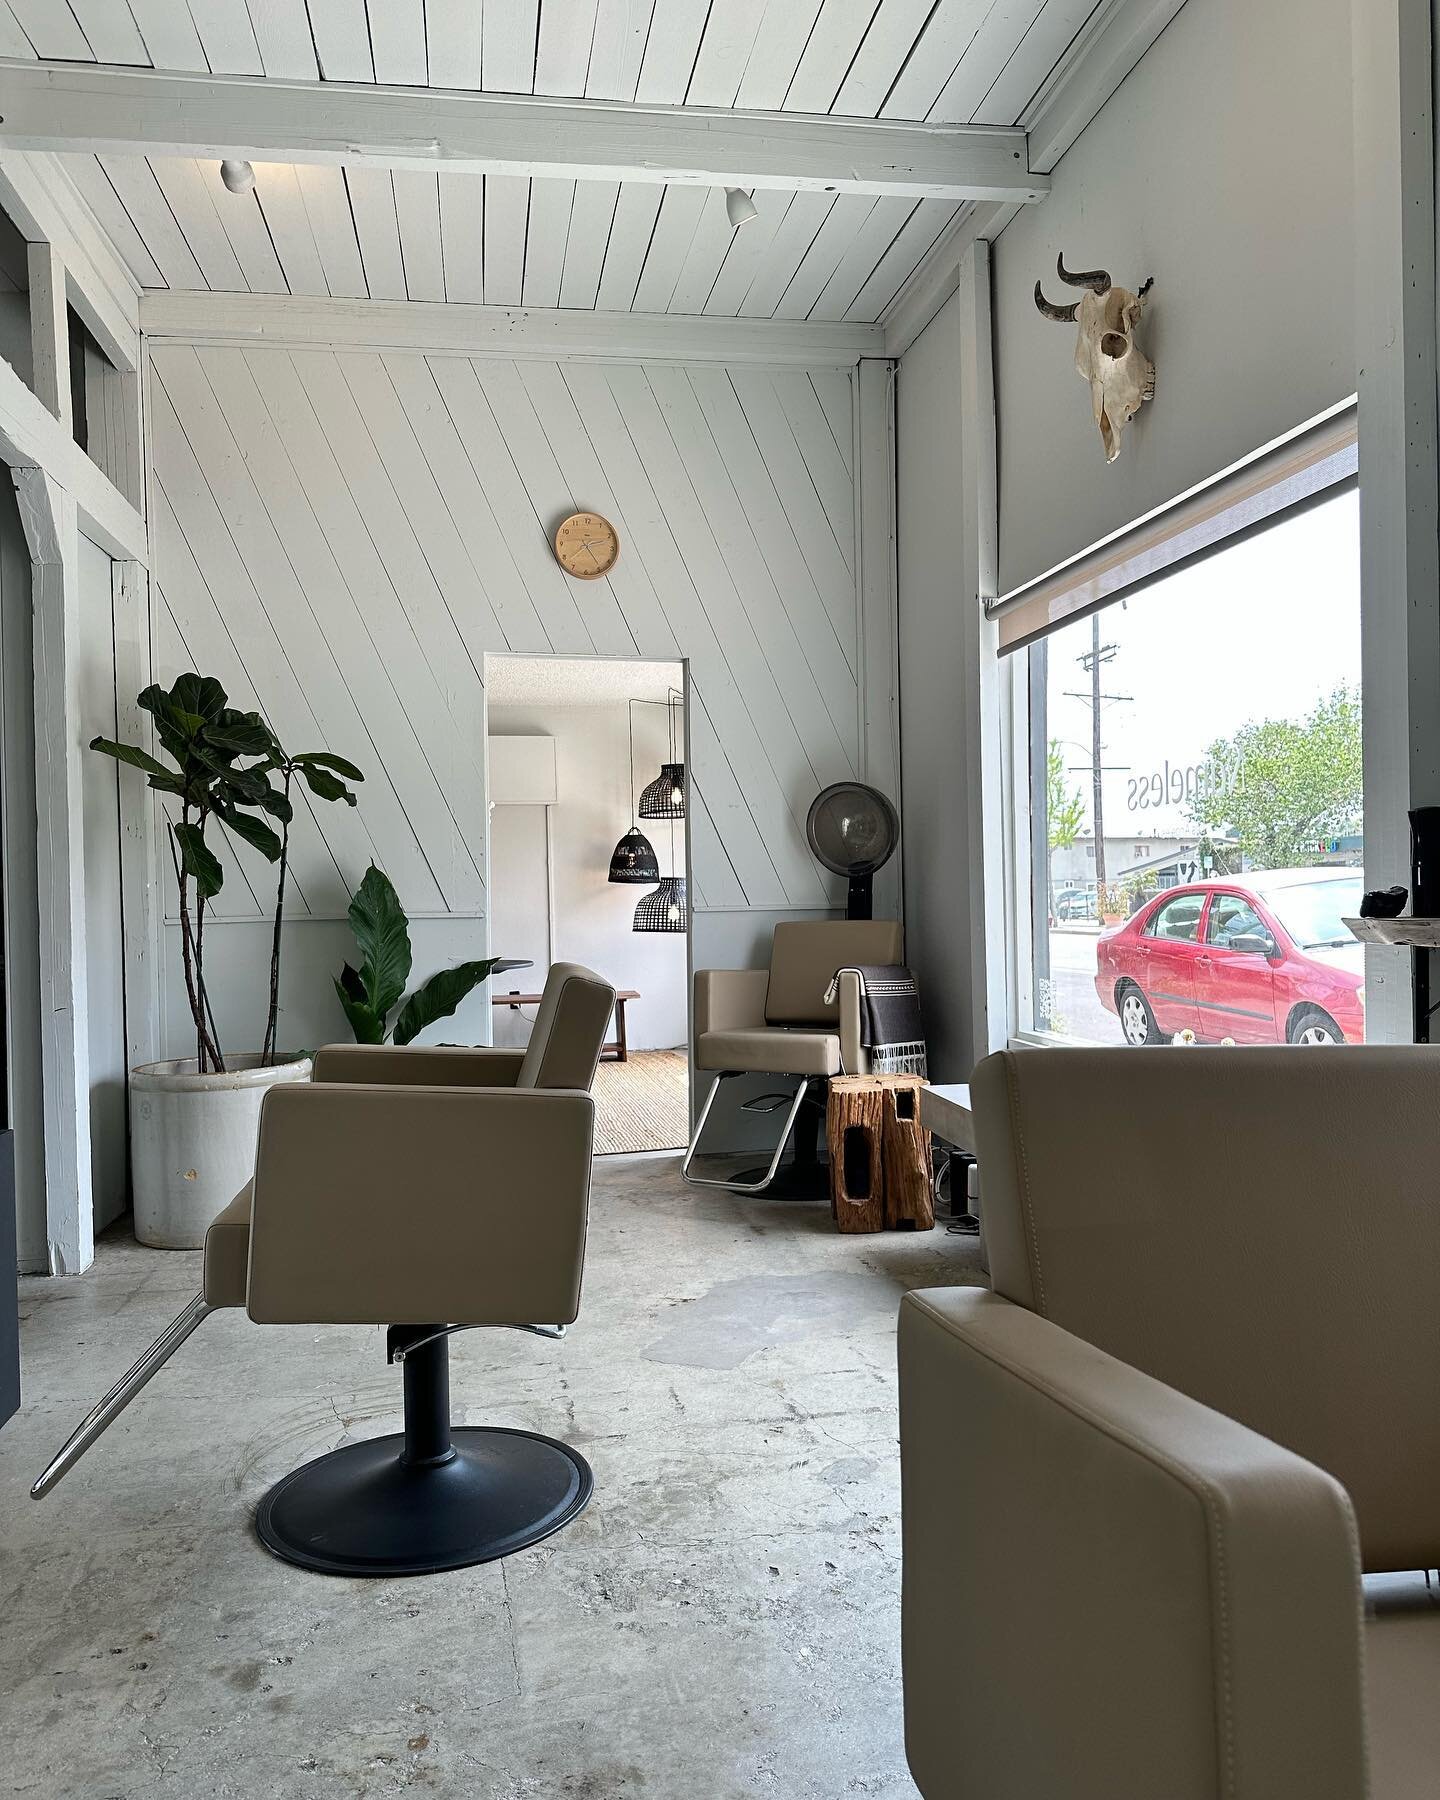 Hi all! I&rsquo;m excited to announce starting May 14th I&rsquo;ll be moving to a new salon in Eagle rock! @nameless.losangeles was created by my friend Henry and it is really beautiful and laid back with all of my favorite products! 
The last 2+ yea